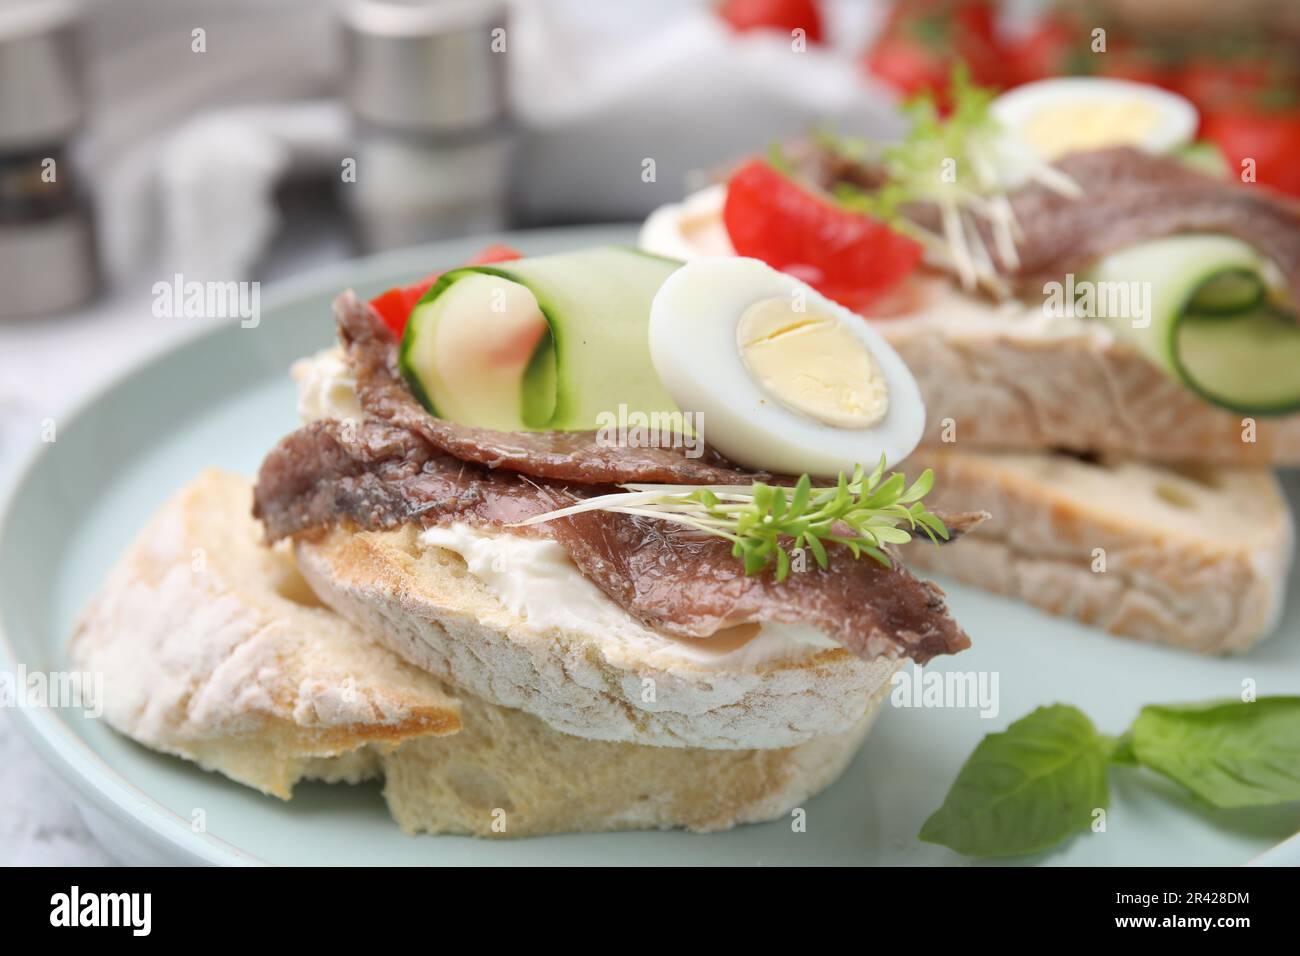 Delicious bruschettas with anchovies, tomato, cucumber, egg and cream cheese on plate, closeup Stock Photo